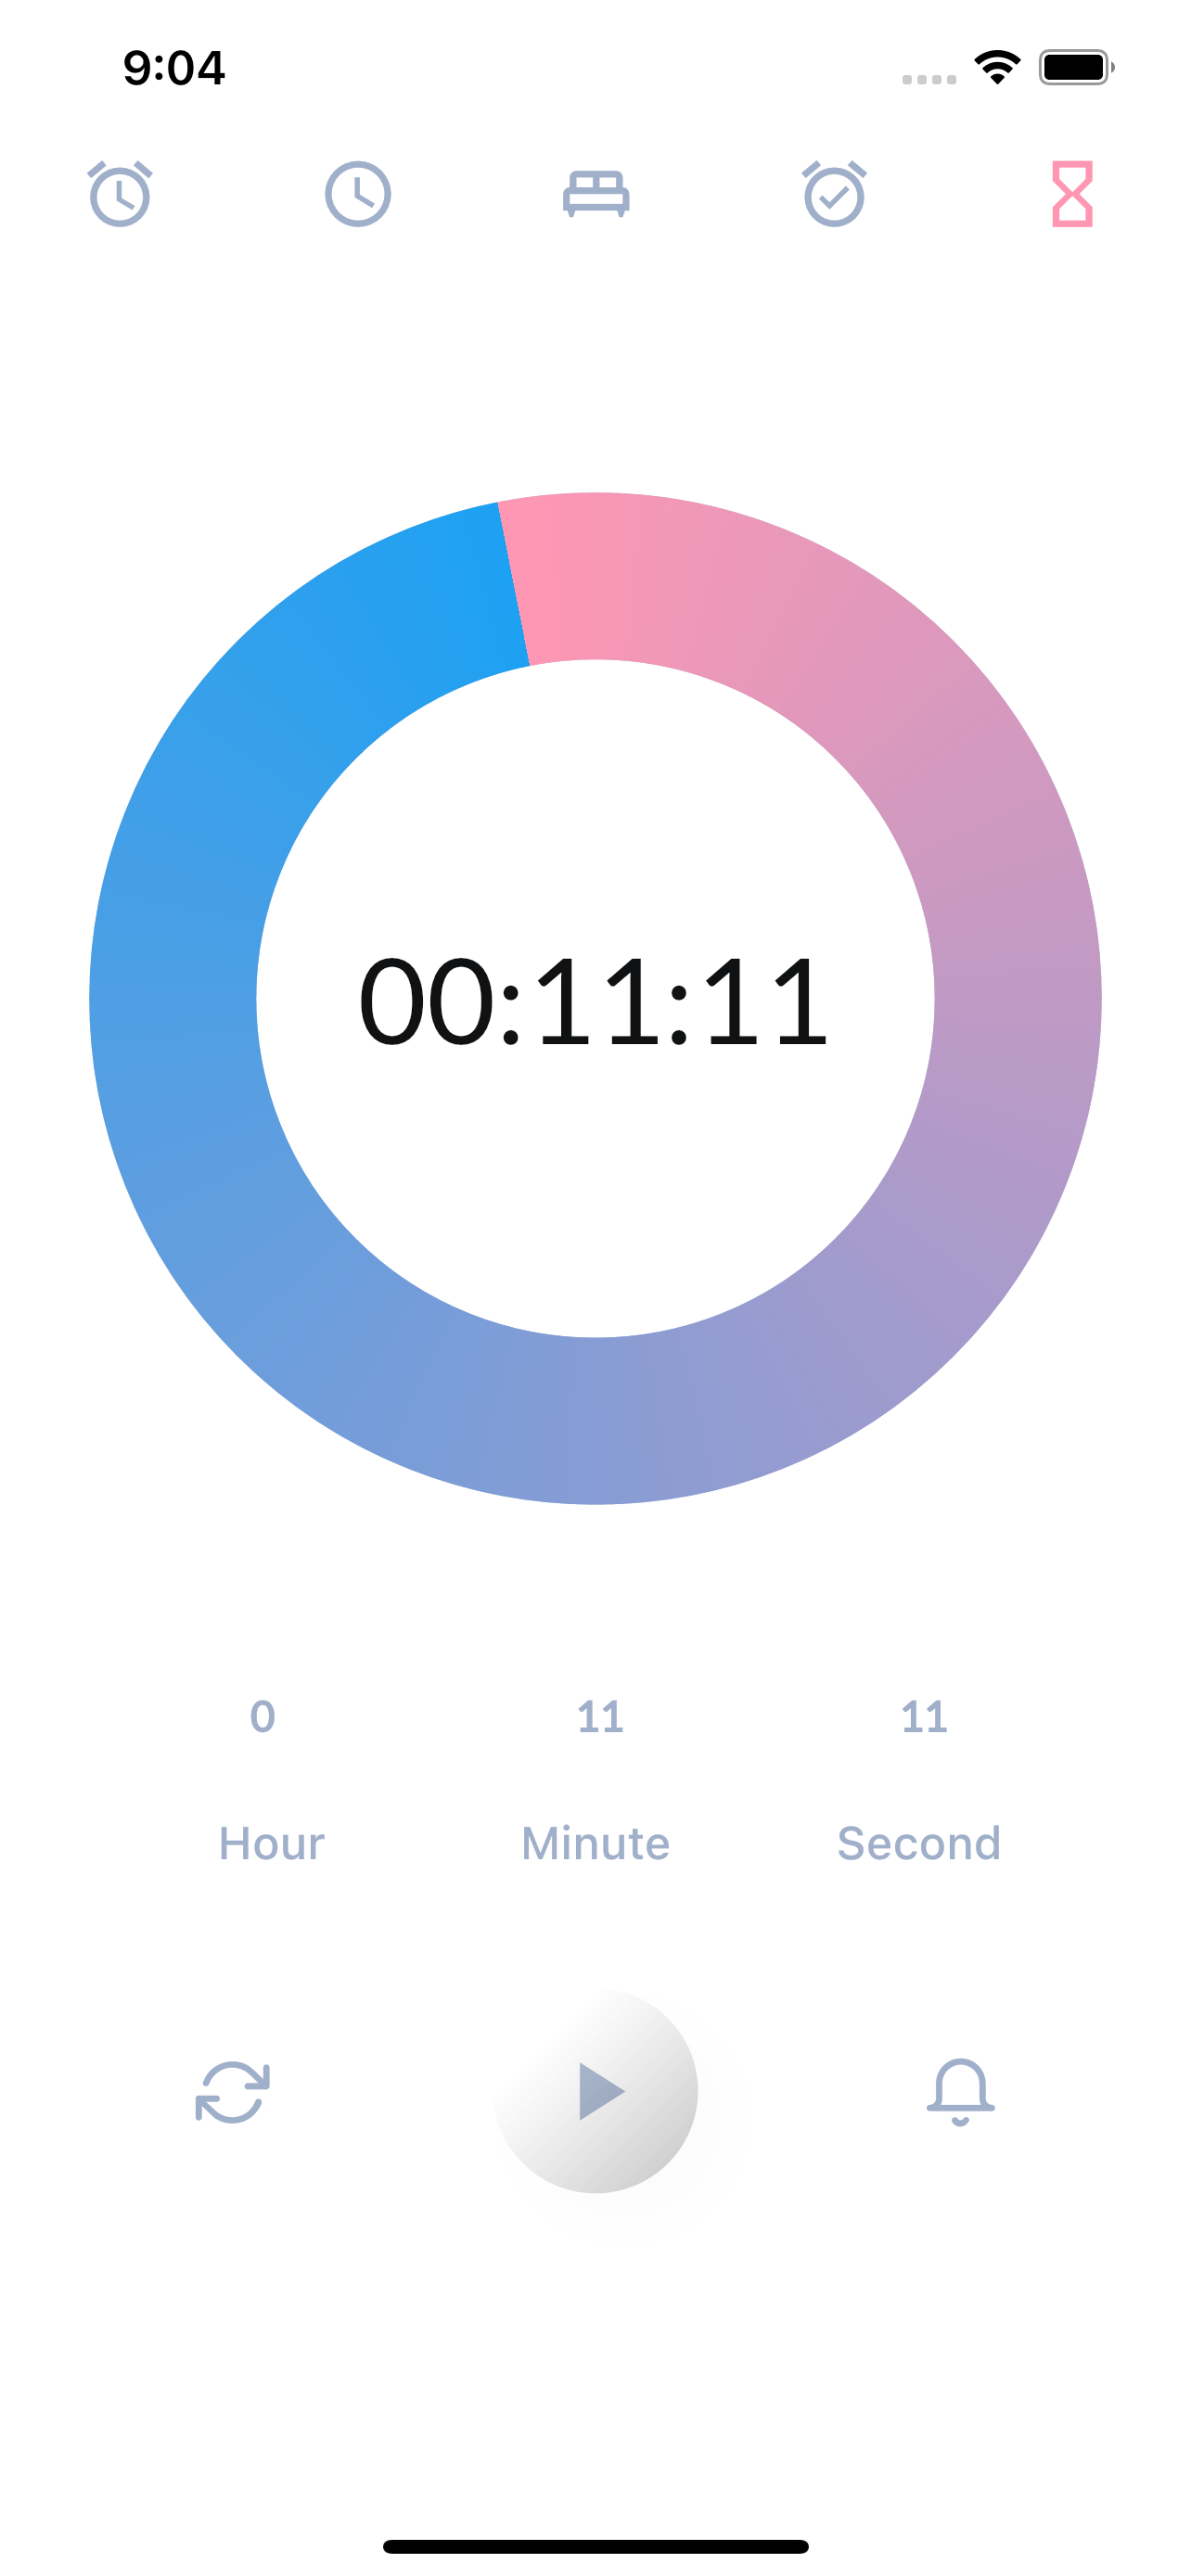 A Nice Clean Analog Clock App UI With Flutter